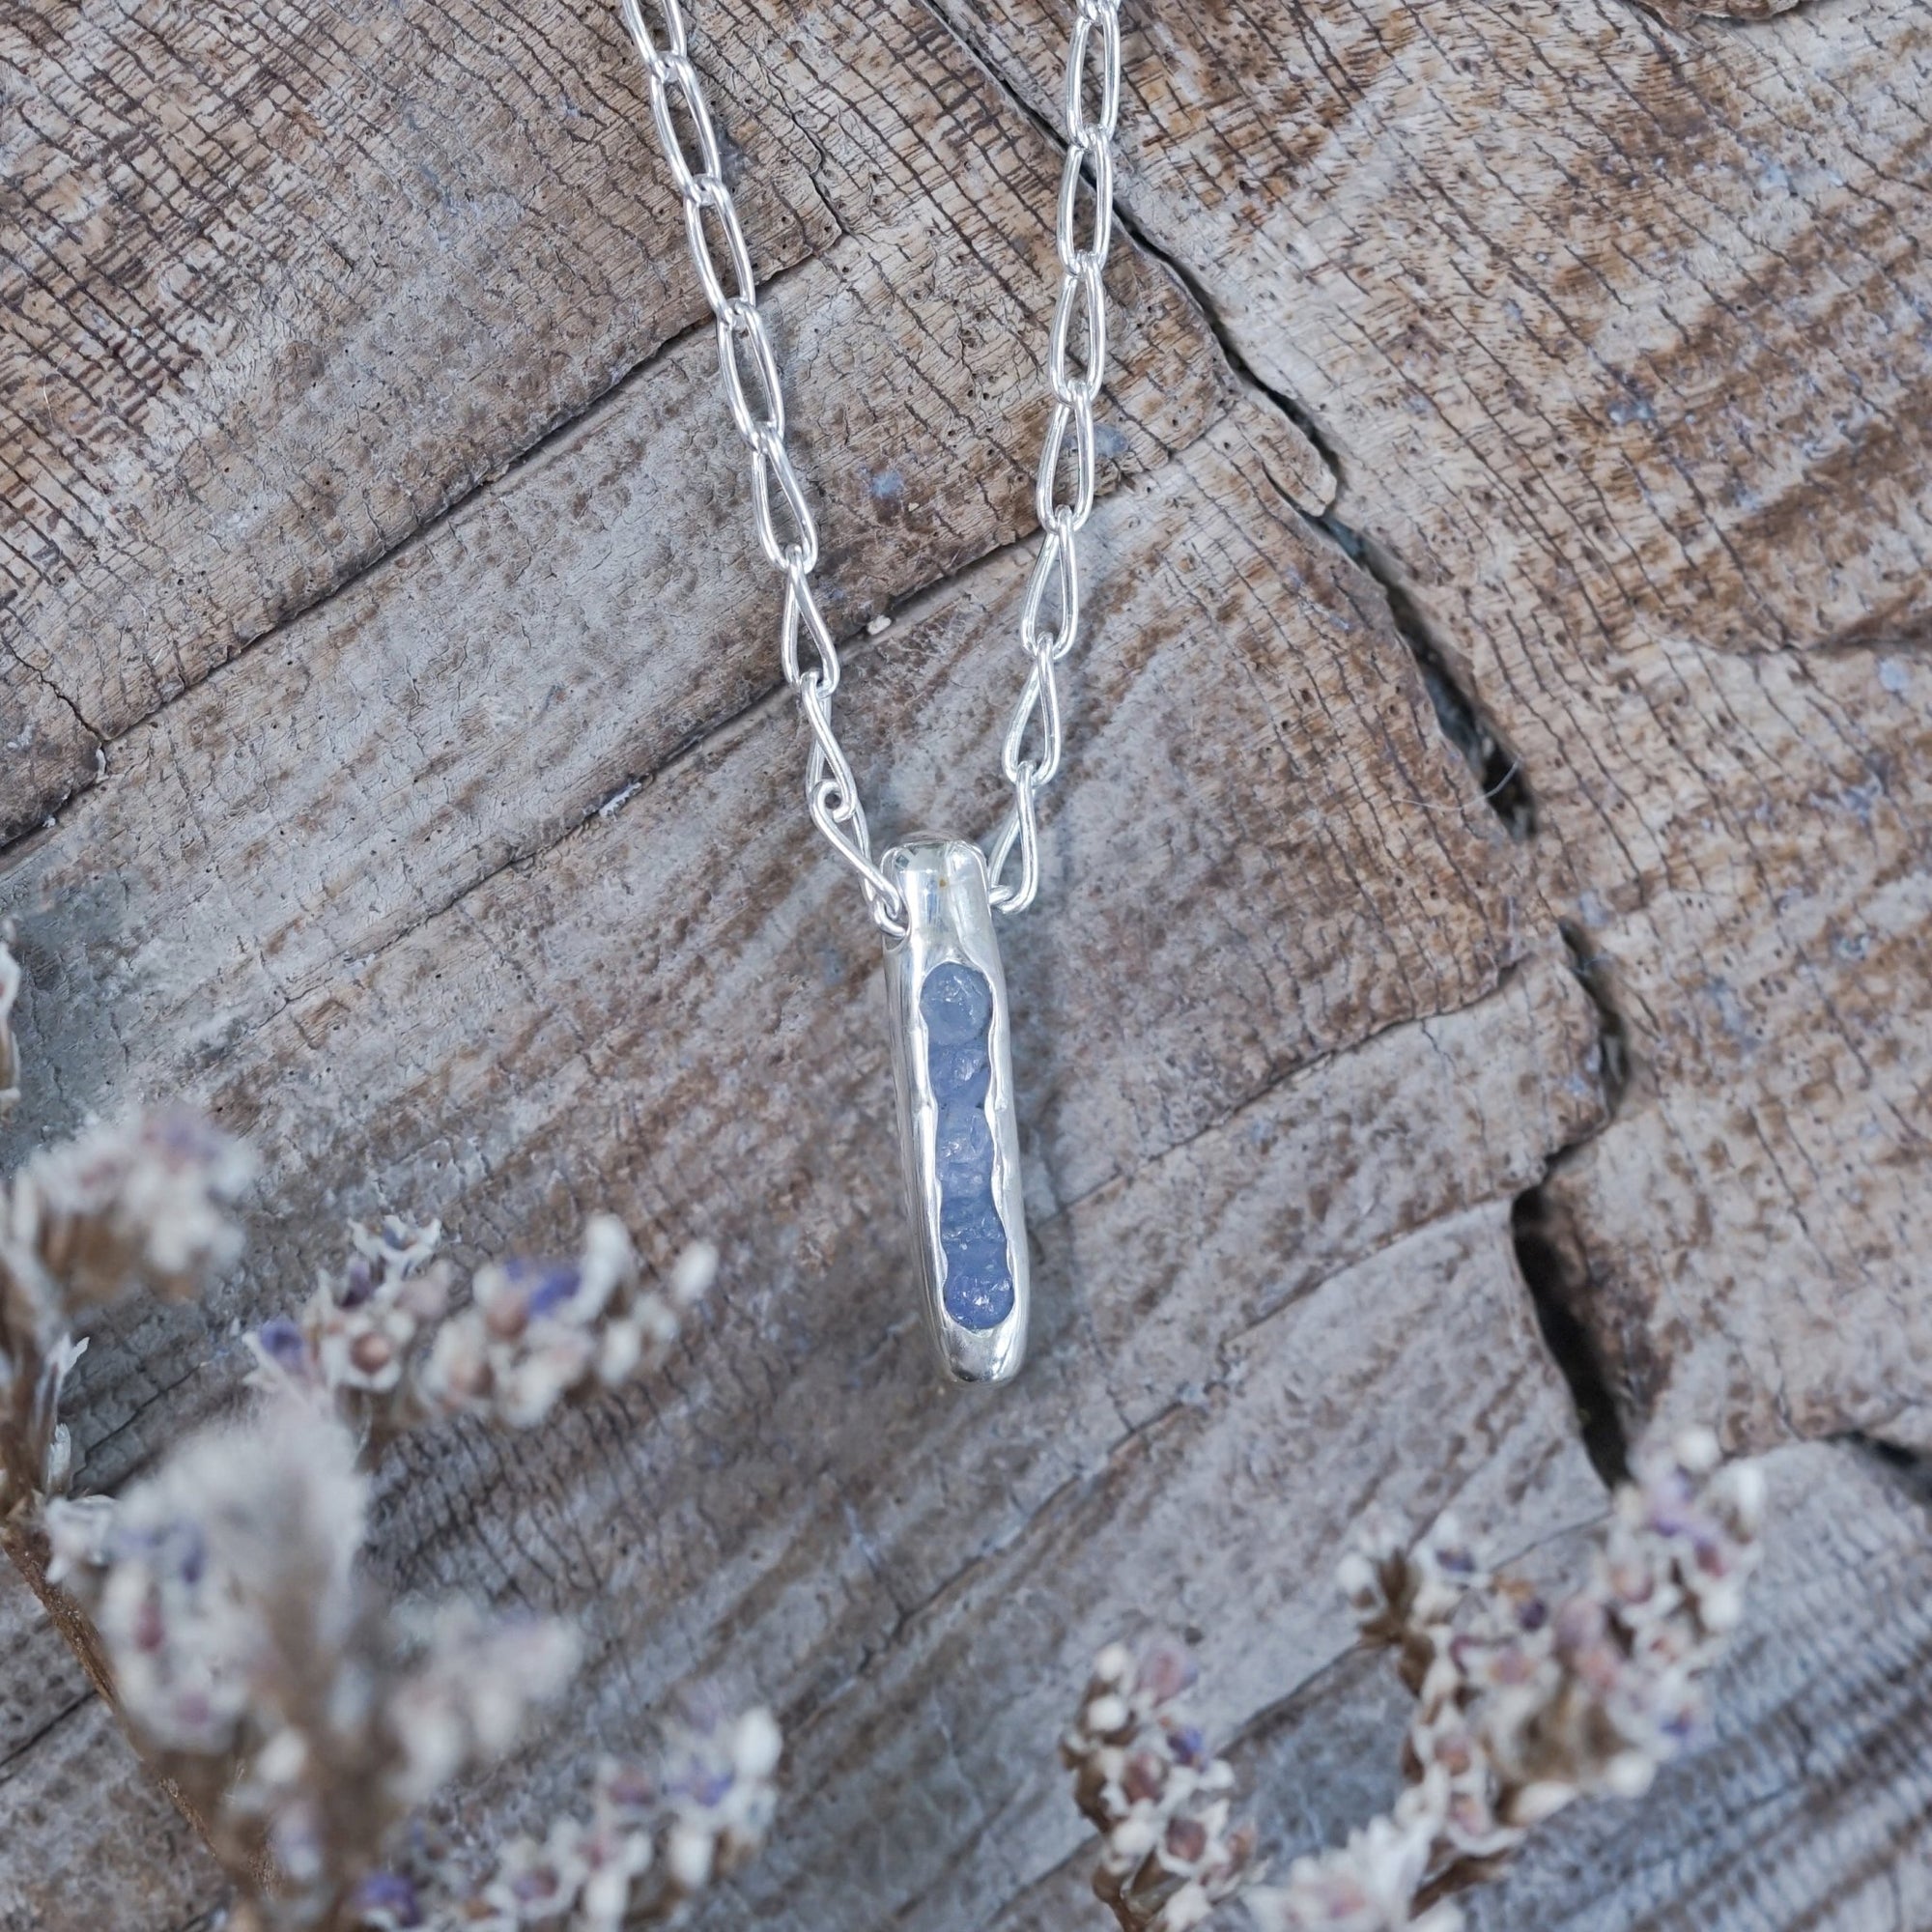 Rough Tanzanite Necklace with Hidden Gems - Gardens of the Sun | Ethical Jewelry